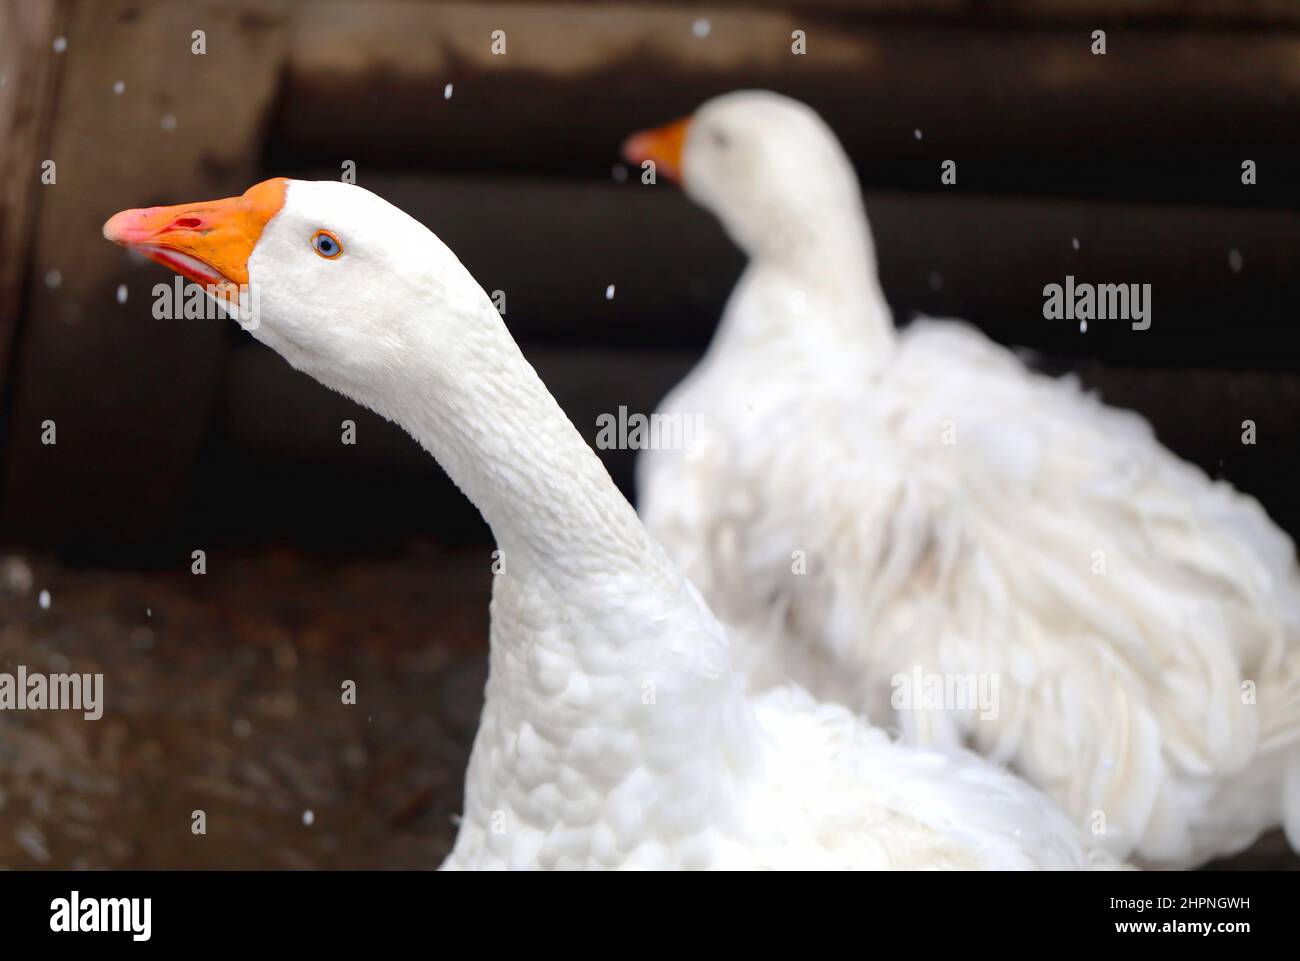 Beautiful white geese photographed close-up on a dark background Stock Photo